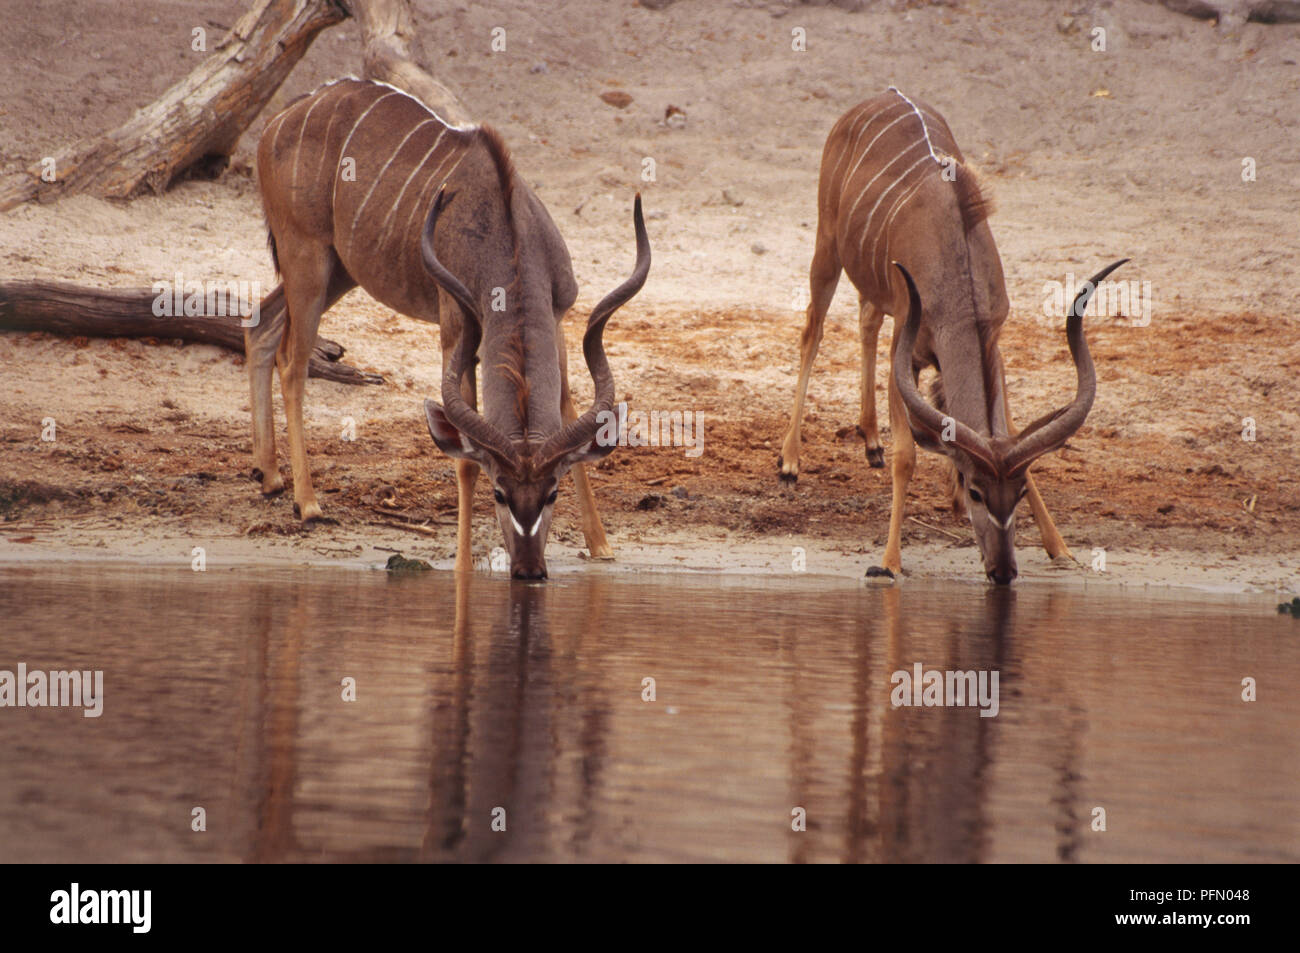 Kudu, Tragelaphus strepsiceros, two drinking from waterhole, necks bending down, brown body with thin white bands across body and nose, long wavy antlers, long slender legs, reflecting in calm water, sandy bank in background. Stock Photo